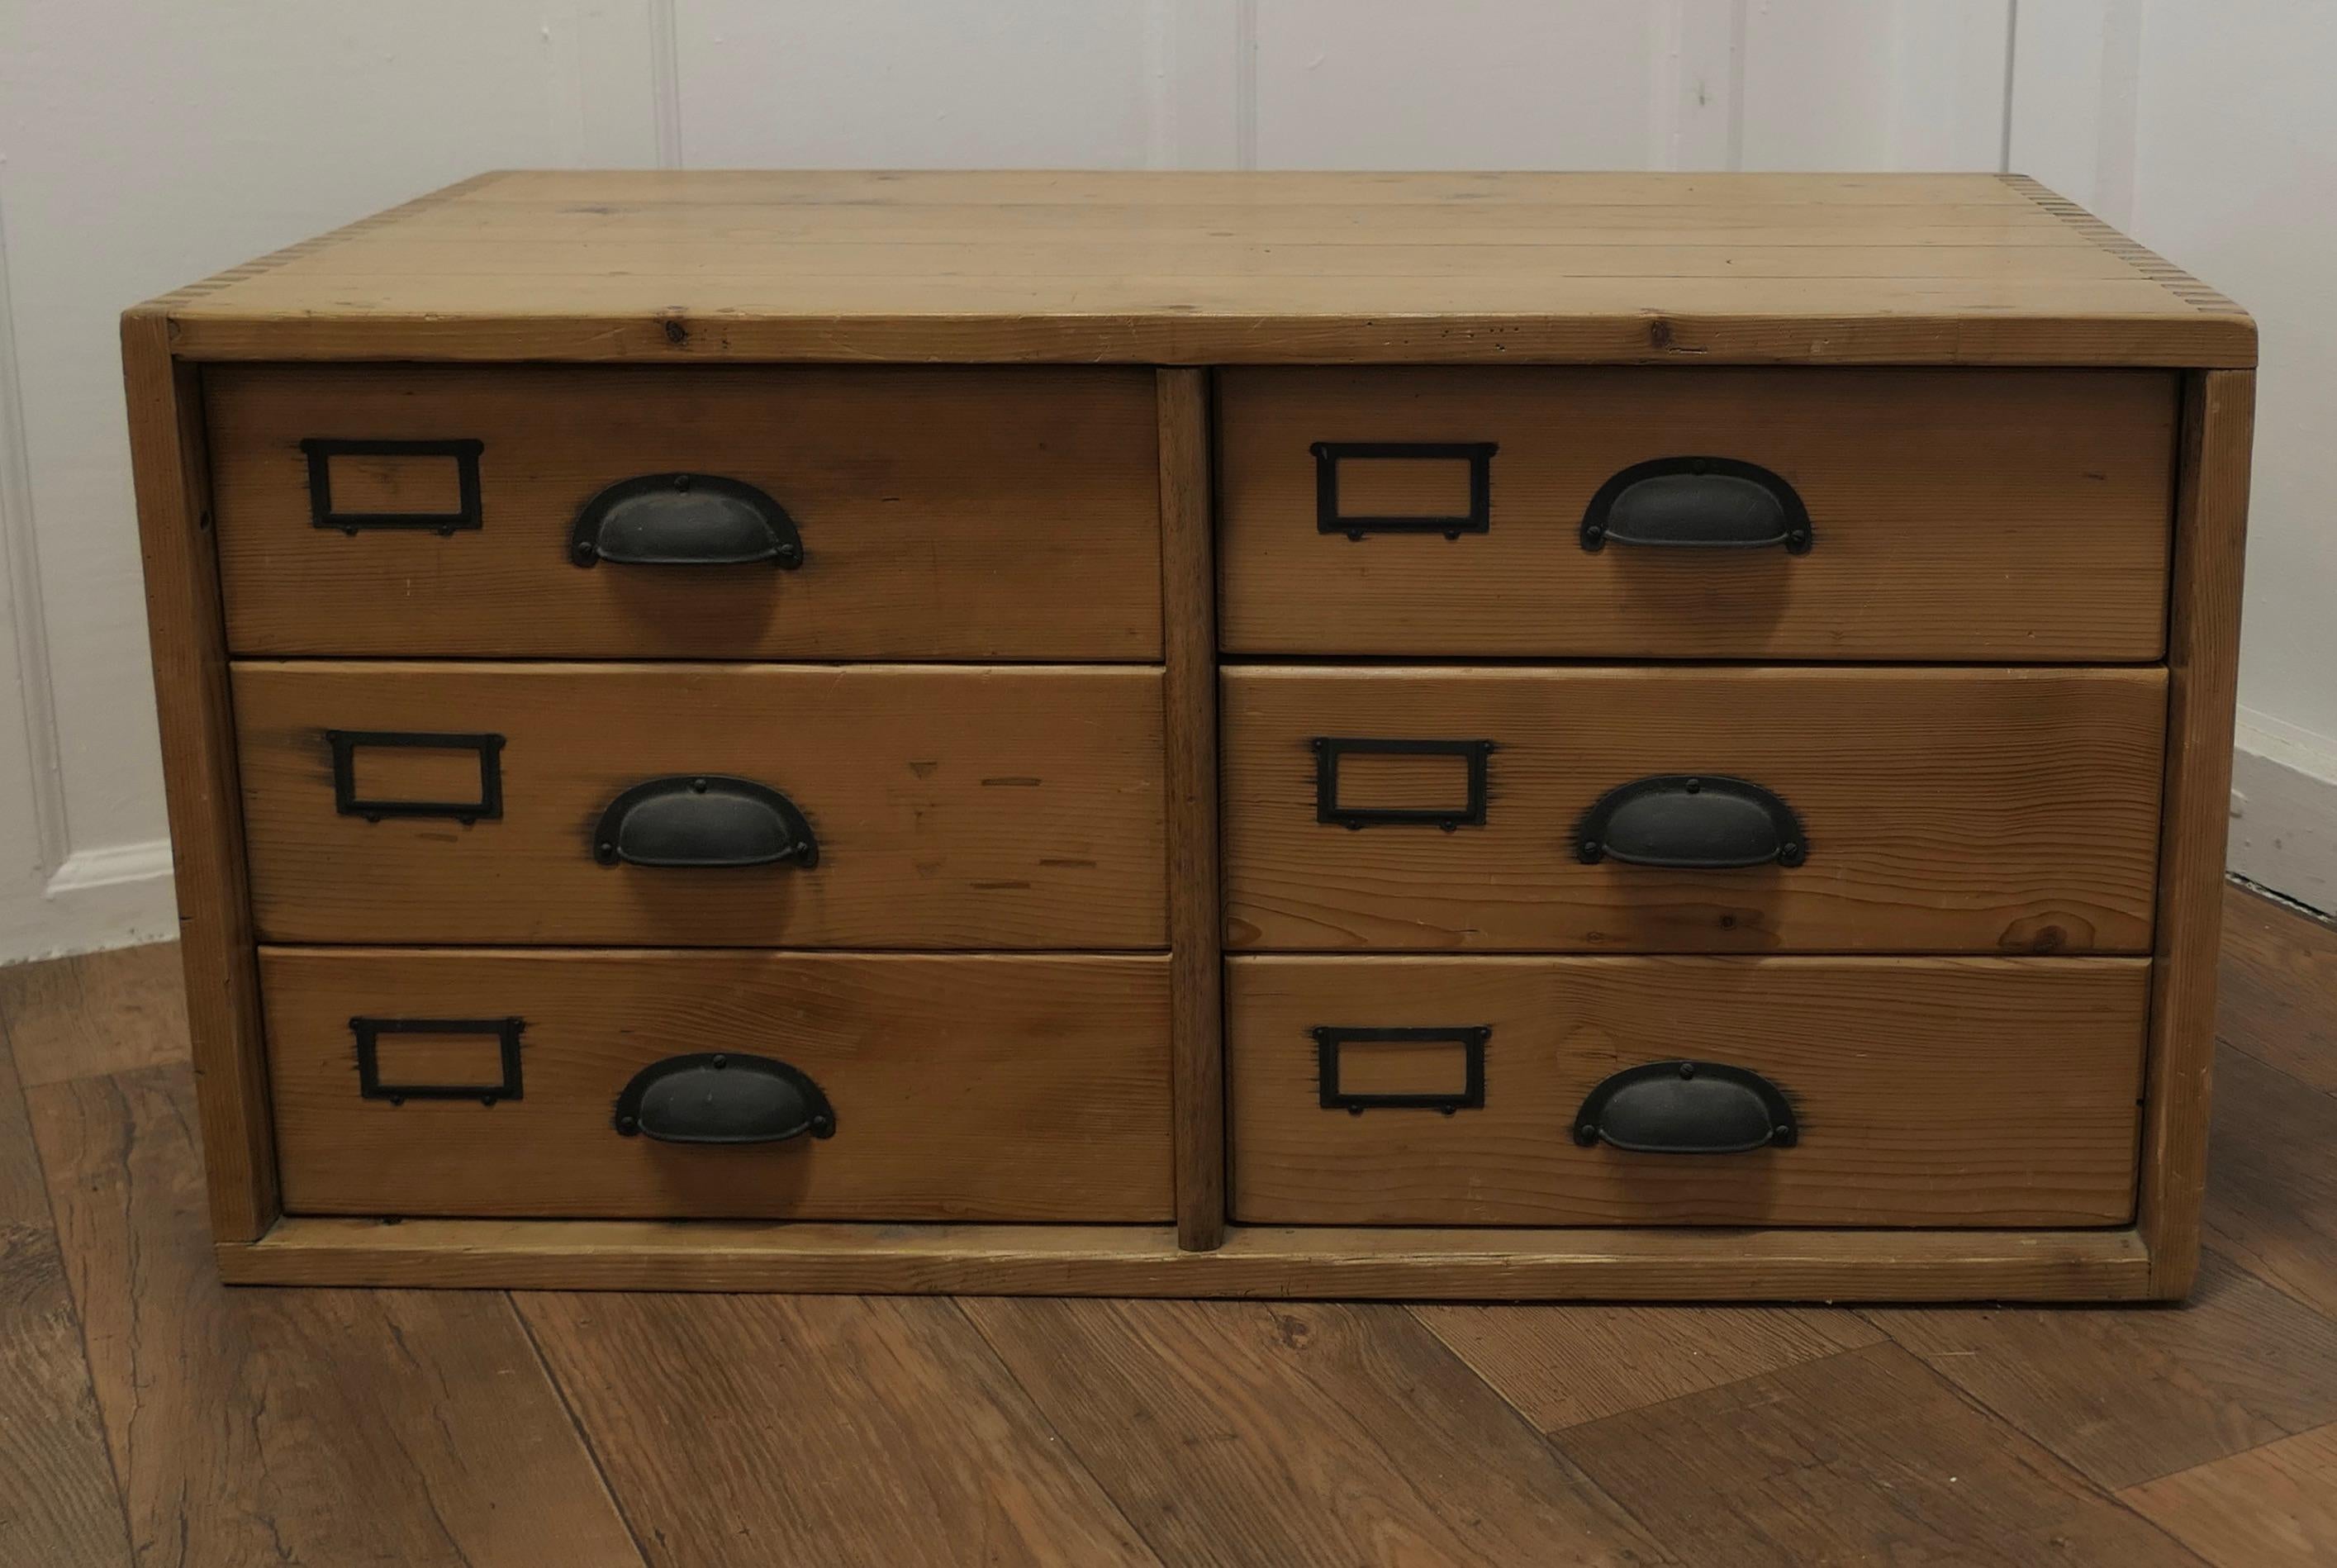 19th Century Filing Cabinet Drawers, Coffee Table

This attractive Pine Filing Cabinet has 6 drawers, some of these have dividers inside, they can be used as a side table or  coffee table with storage inside
The chest has 6 drawers with a label